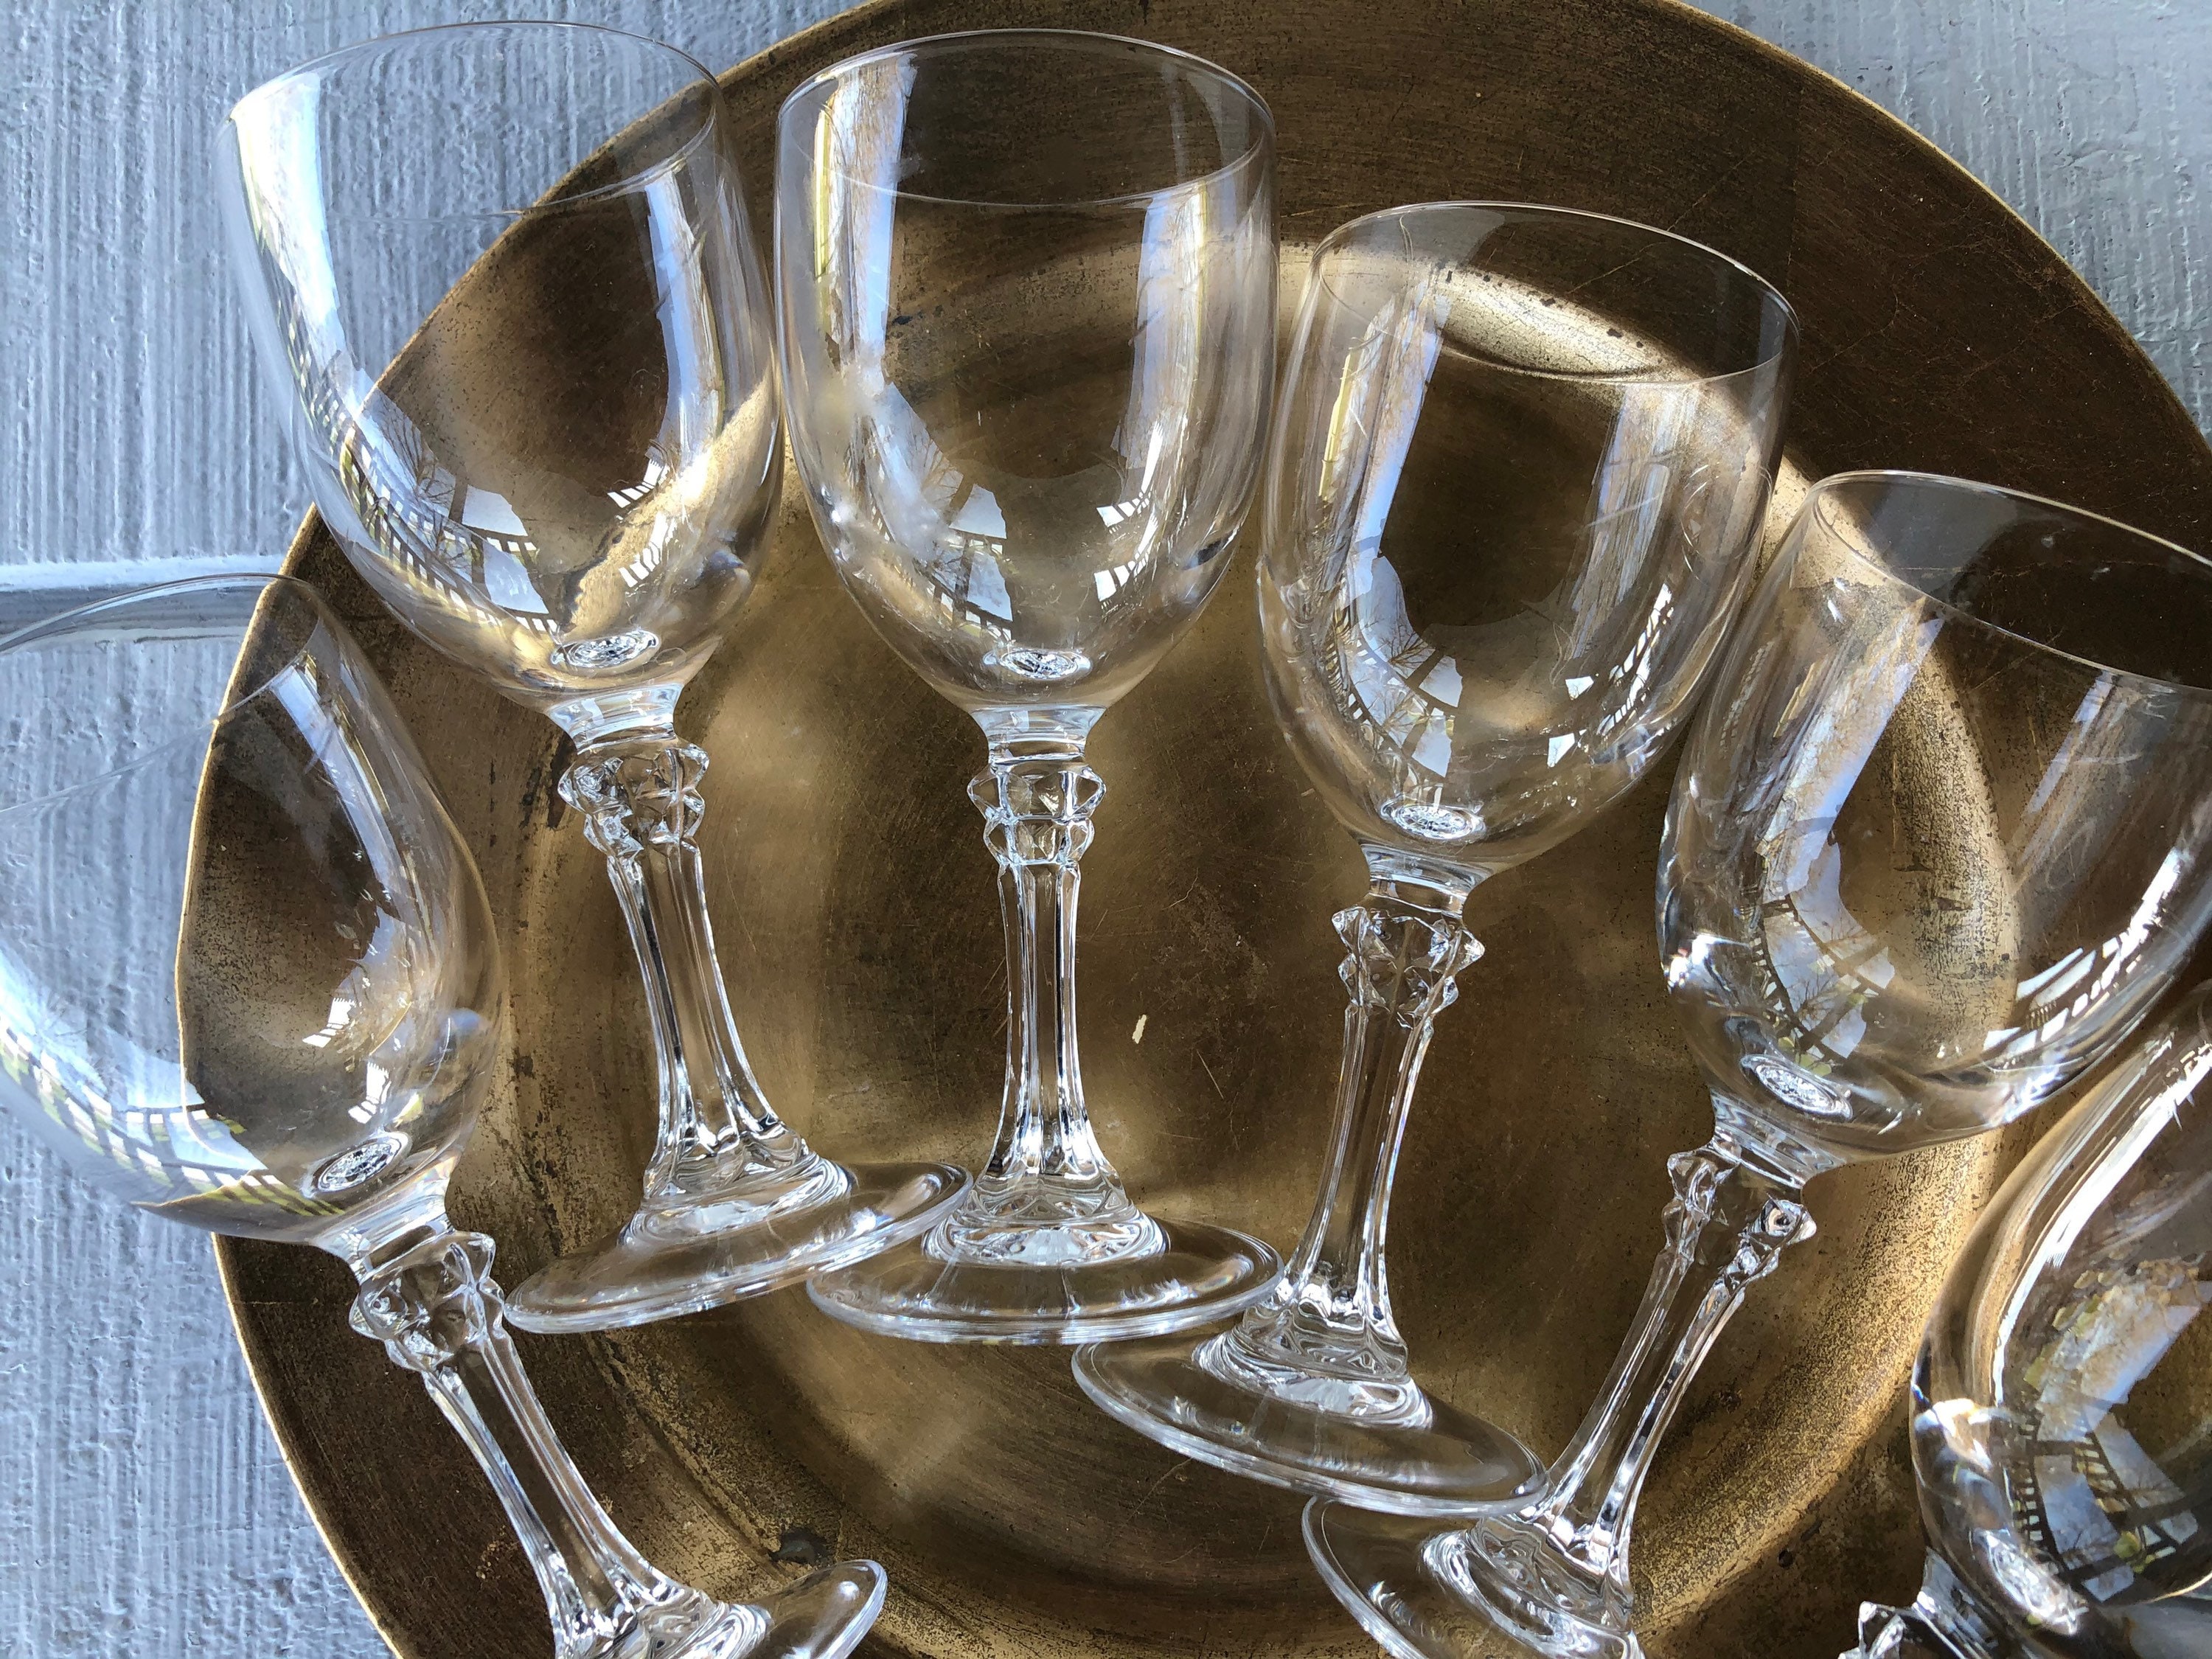 Set of SIX Vintage Lead Crystal White Wine Glasses, possibly